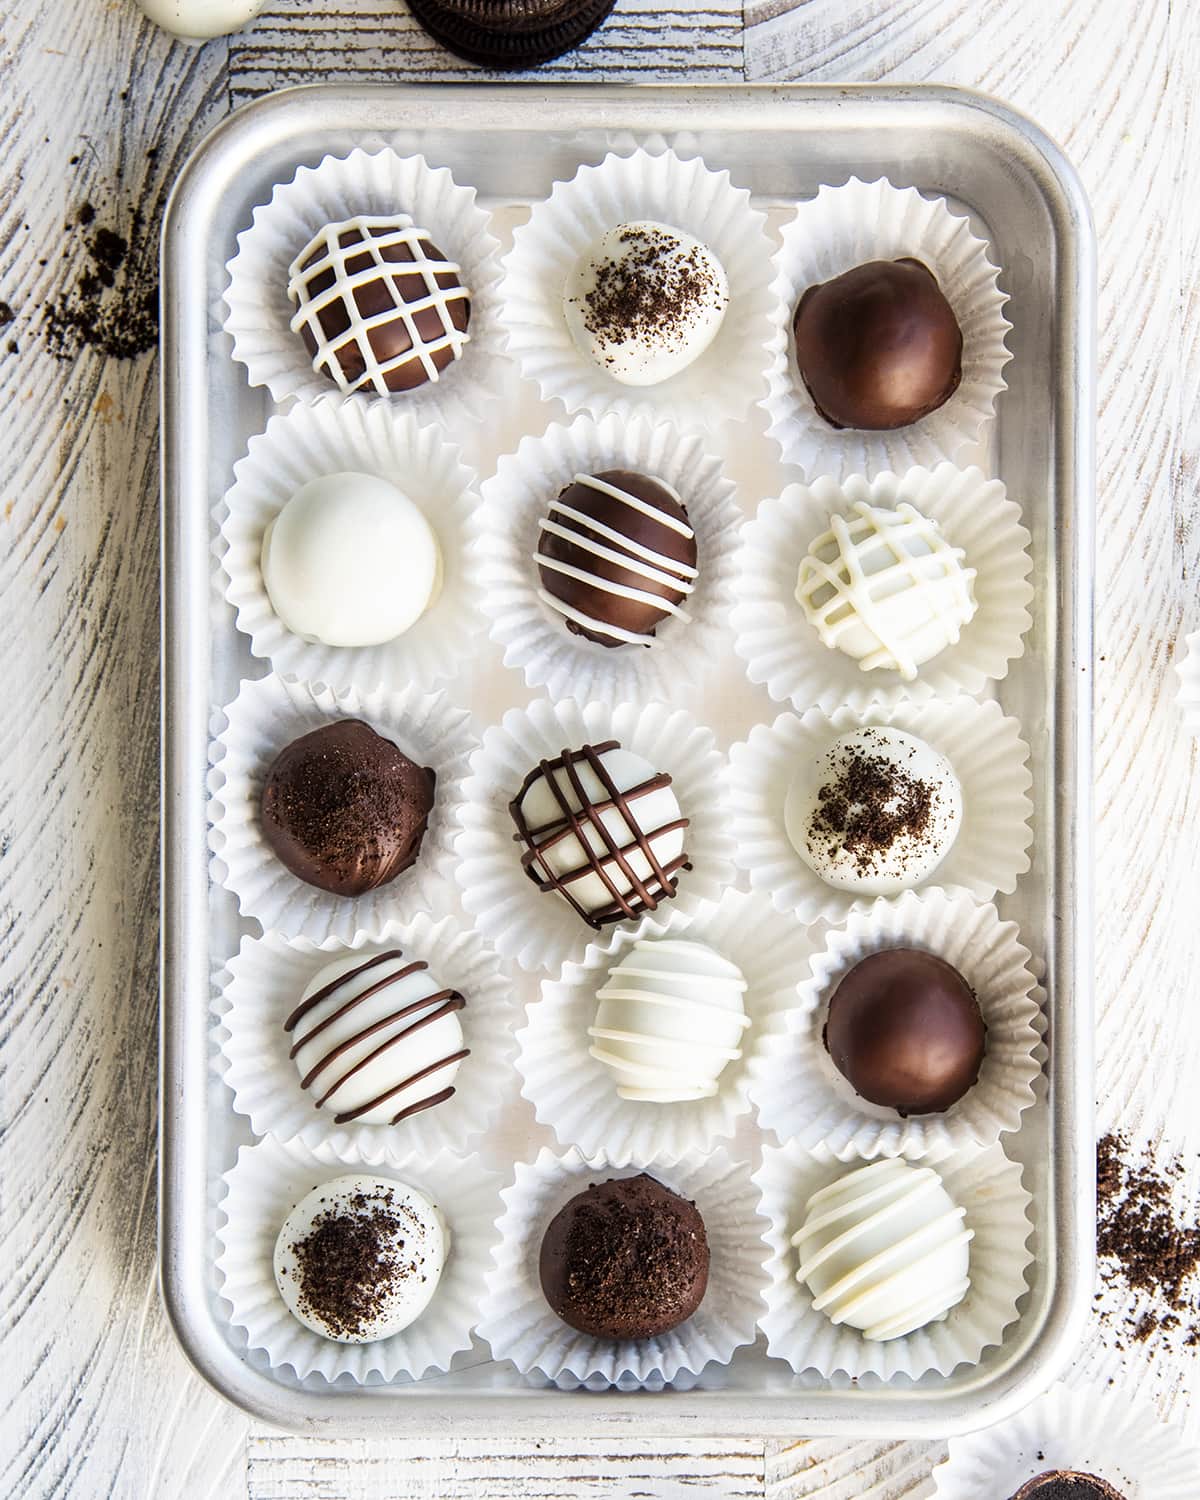 A metal pan topped with chocolate and white chocolate covered Oreo balls in rows in paper liners.